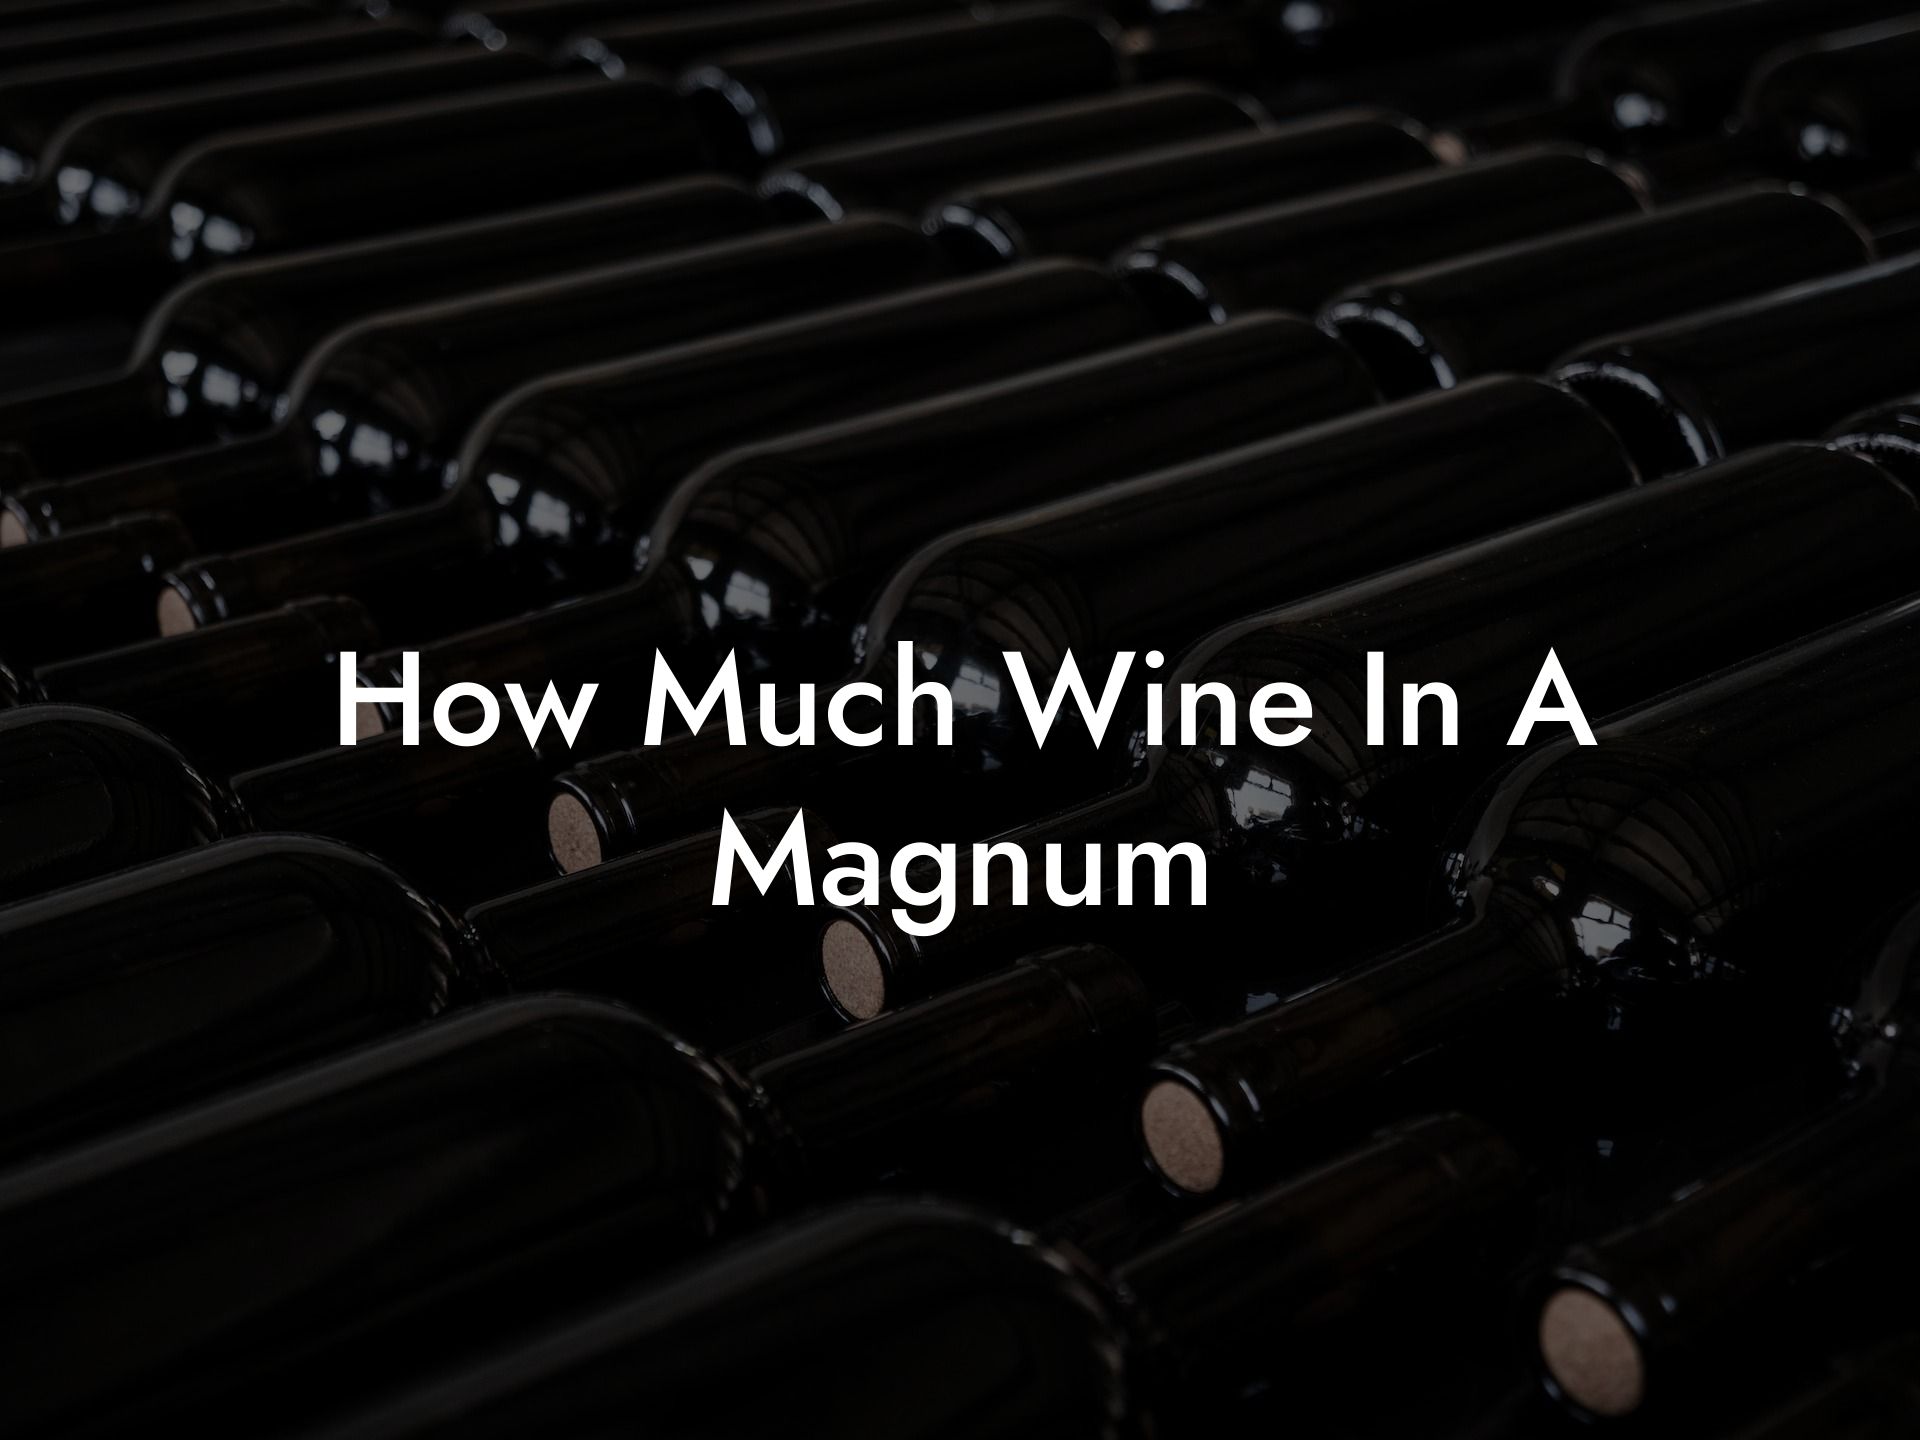 How Much Wine In A Magnum